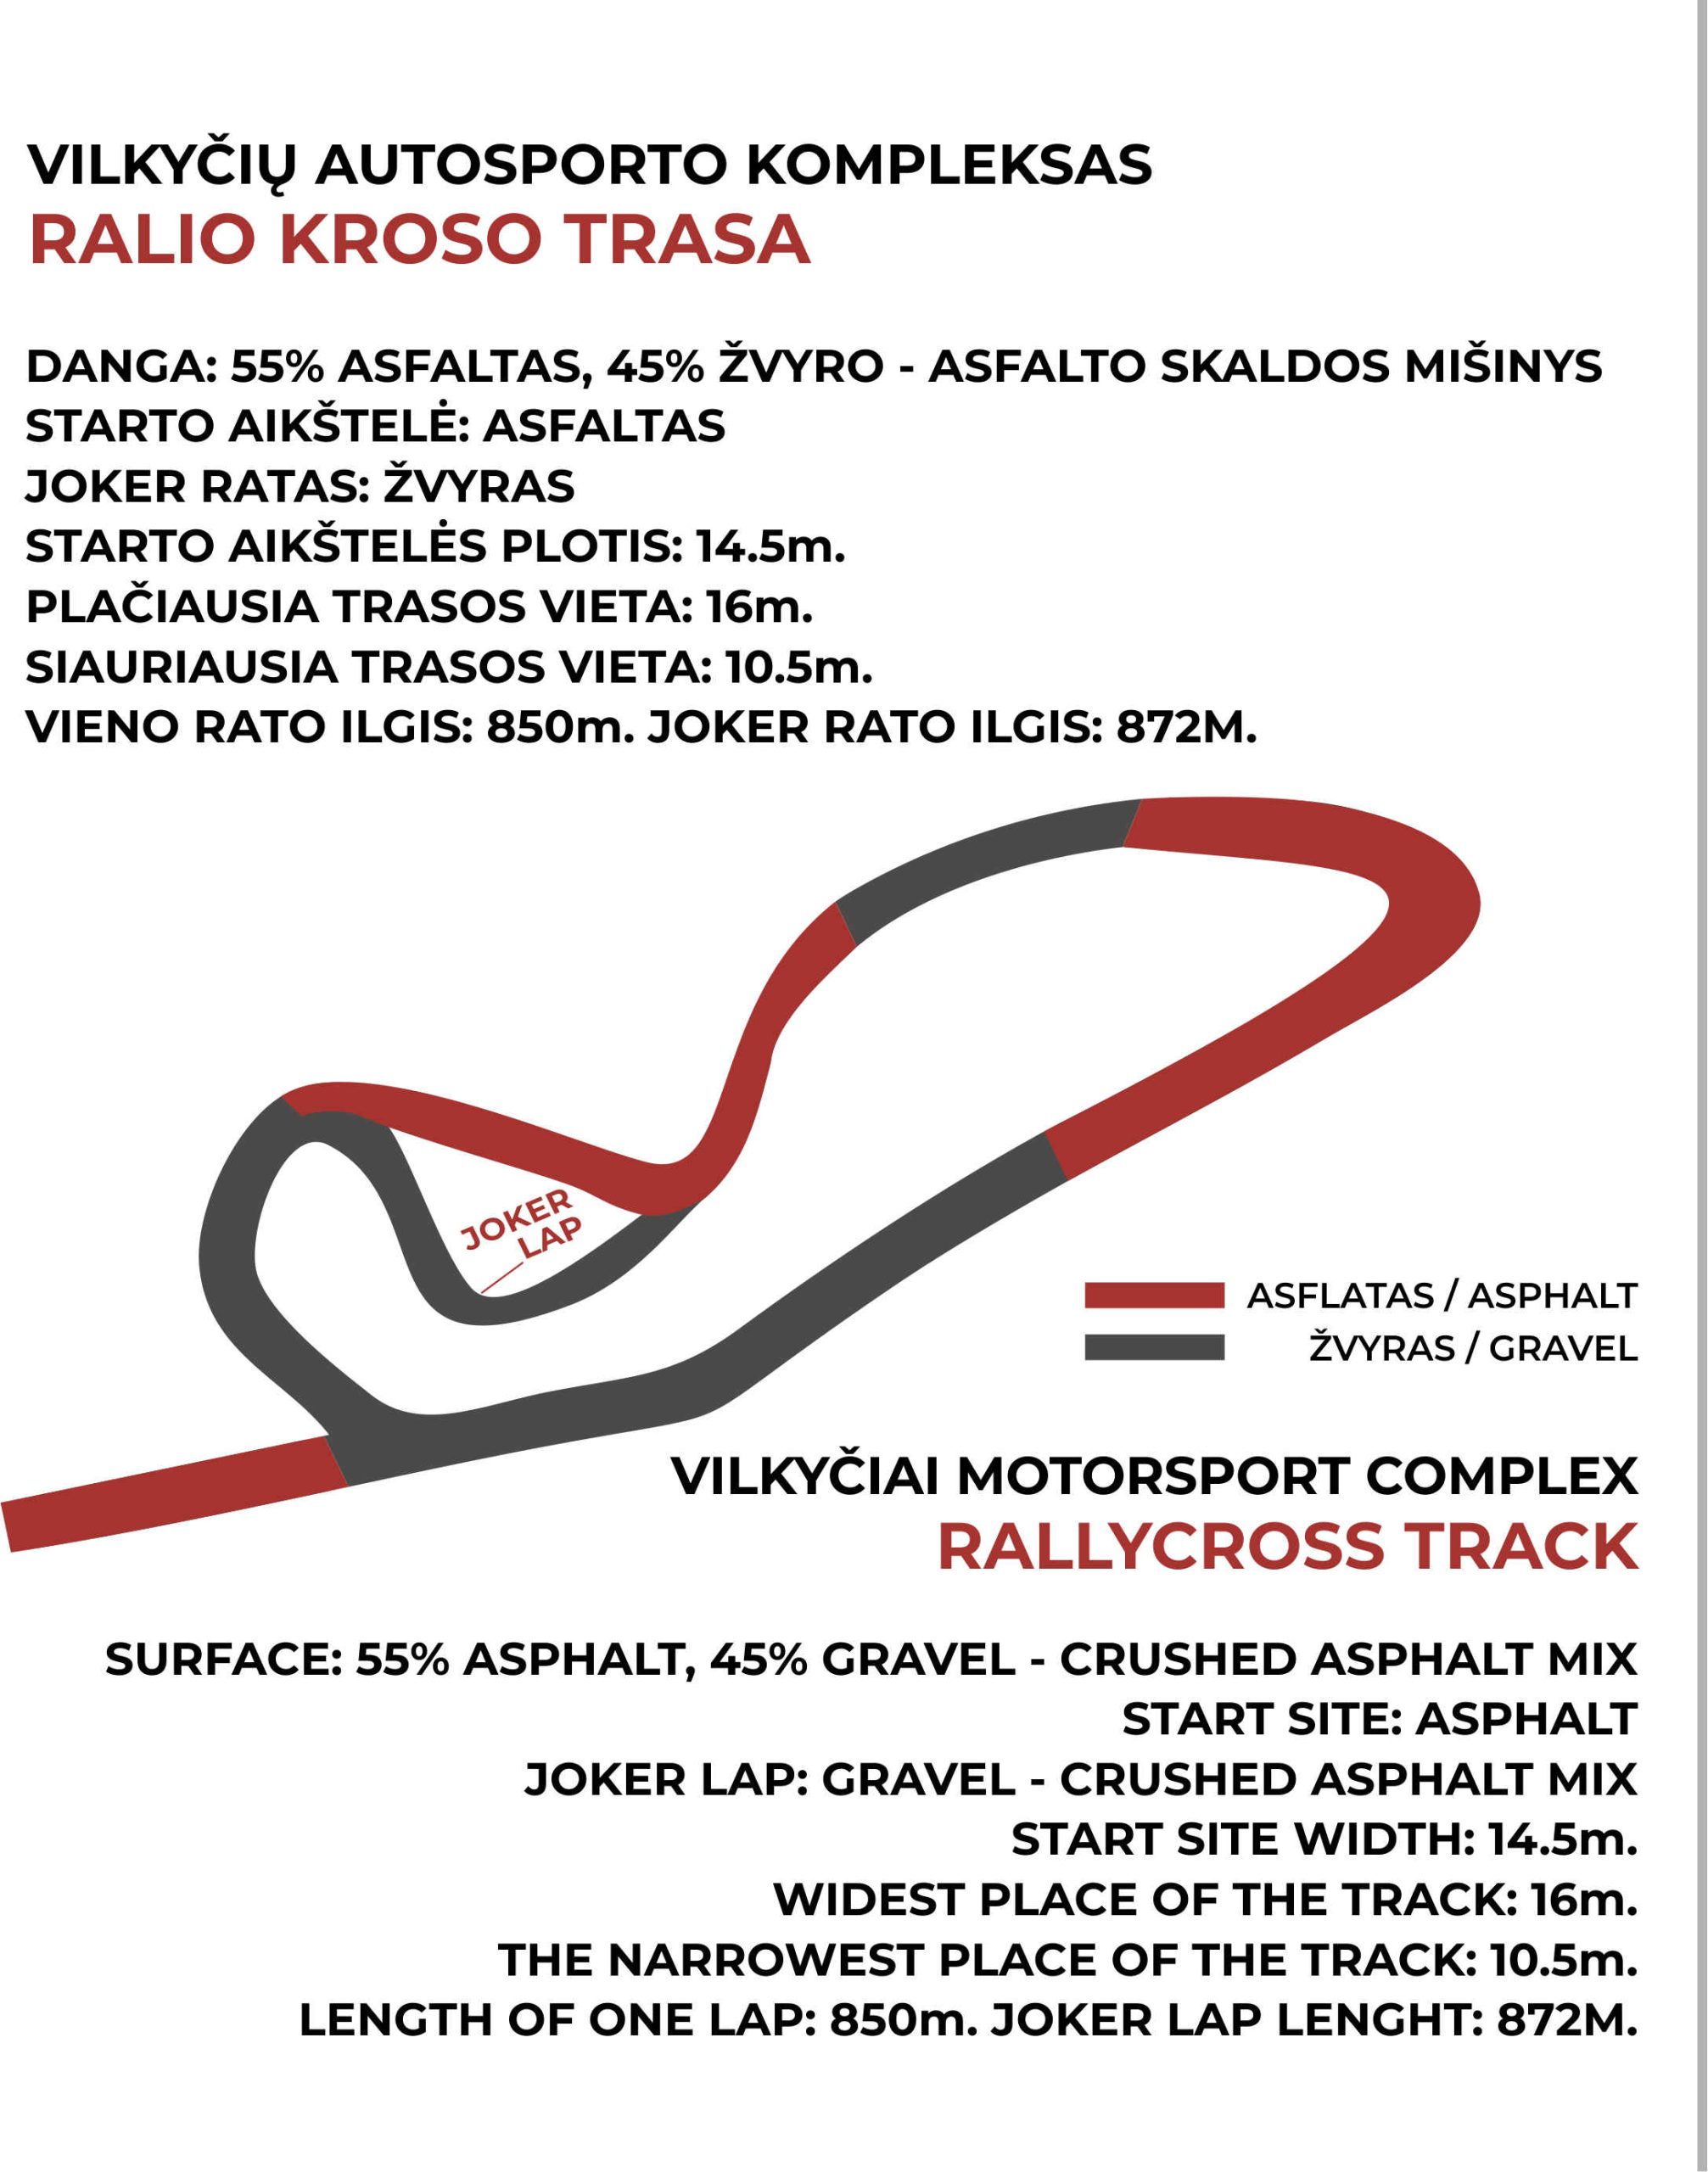 Features of the track